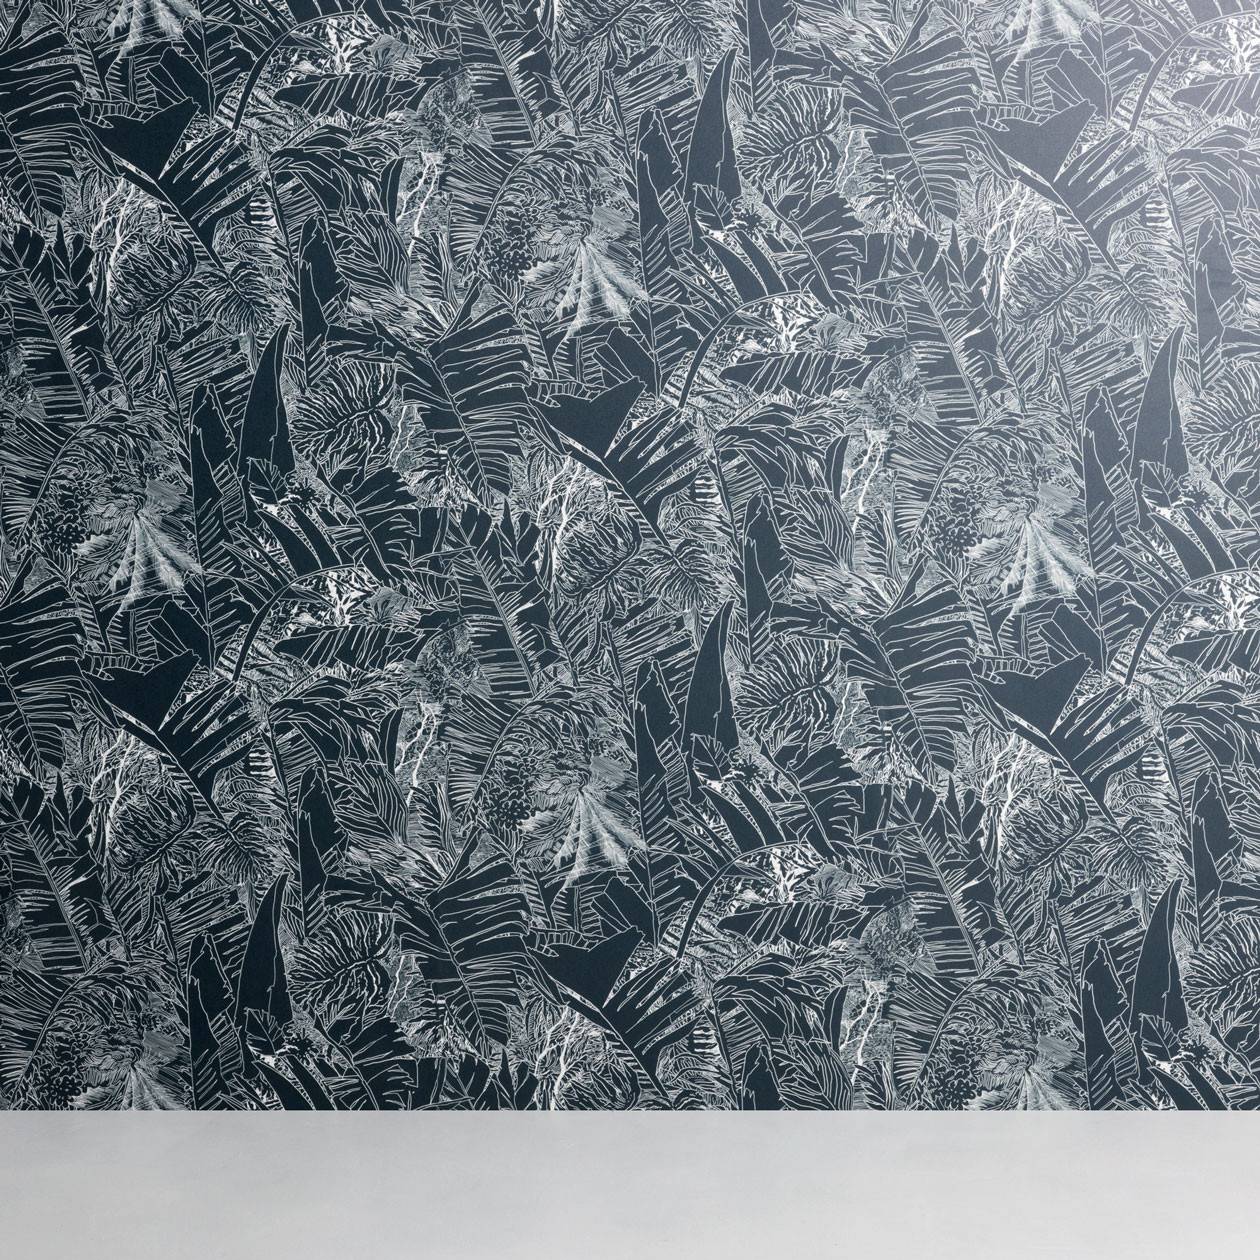 Tropical wallpaper - Petite Friture white on ink